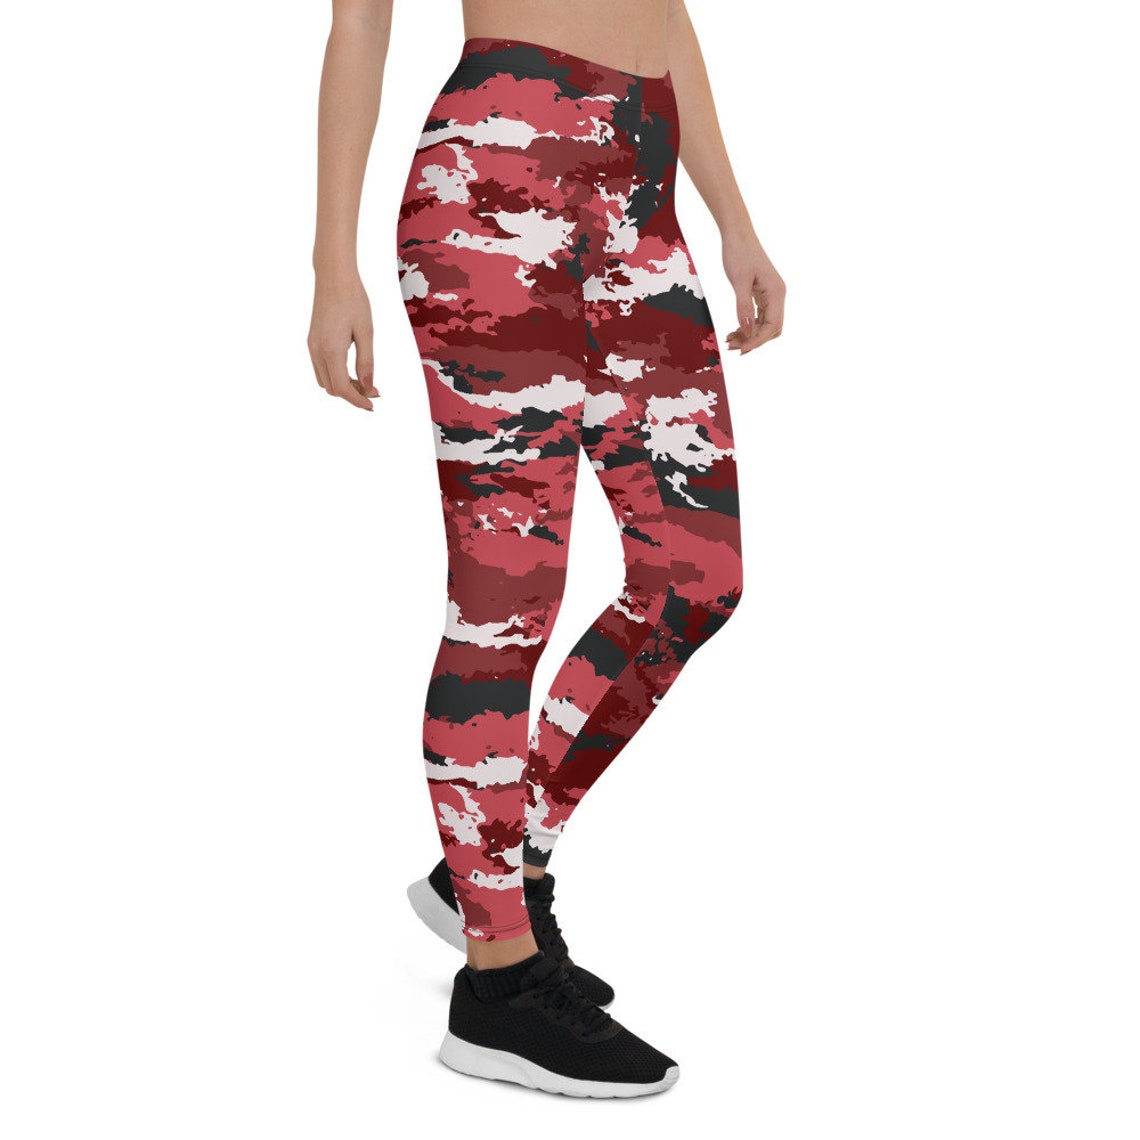 Red Camo Leggings for Women Army / Military Camouflage Pattern - Etsy